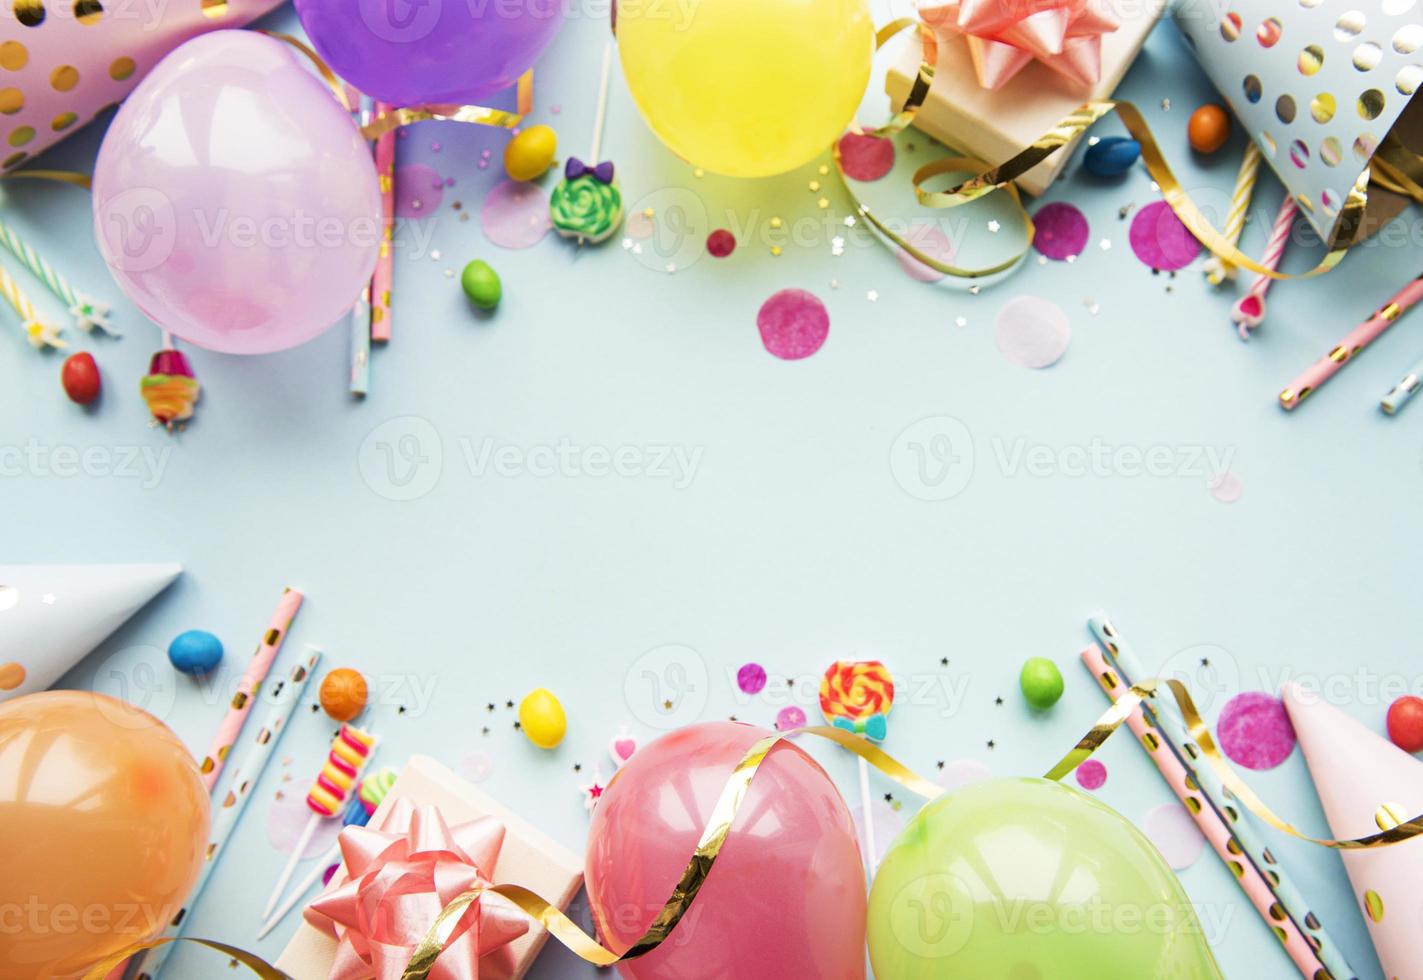 Happy birthday or party background photo